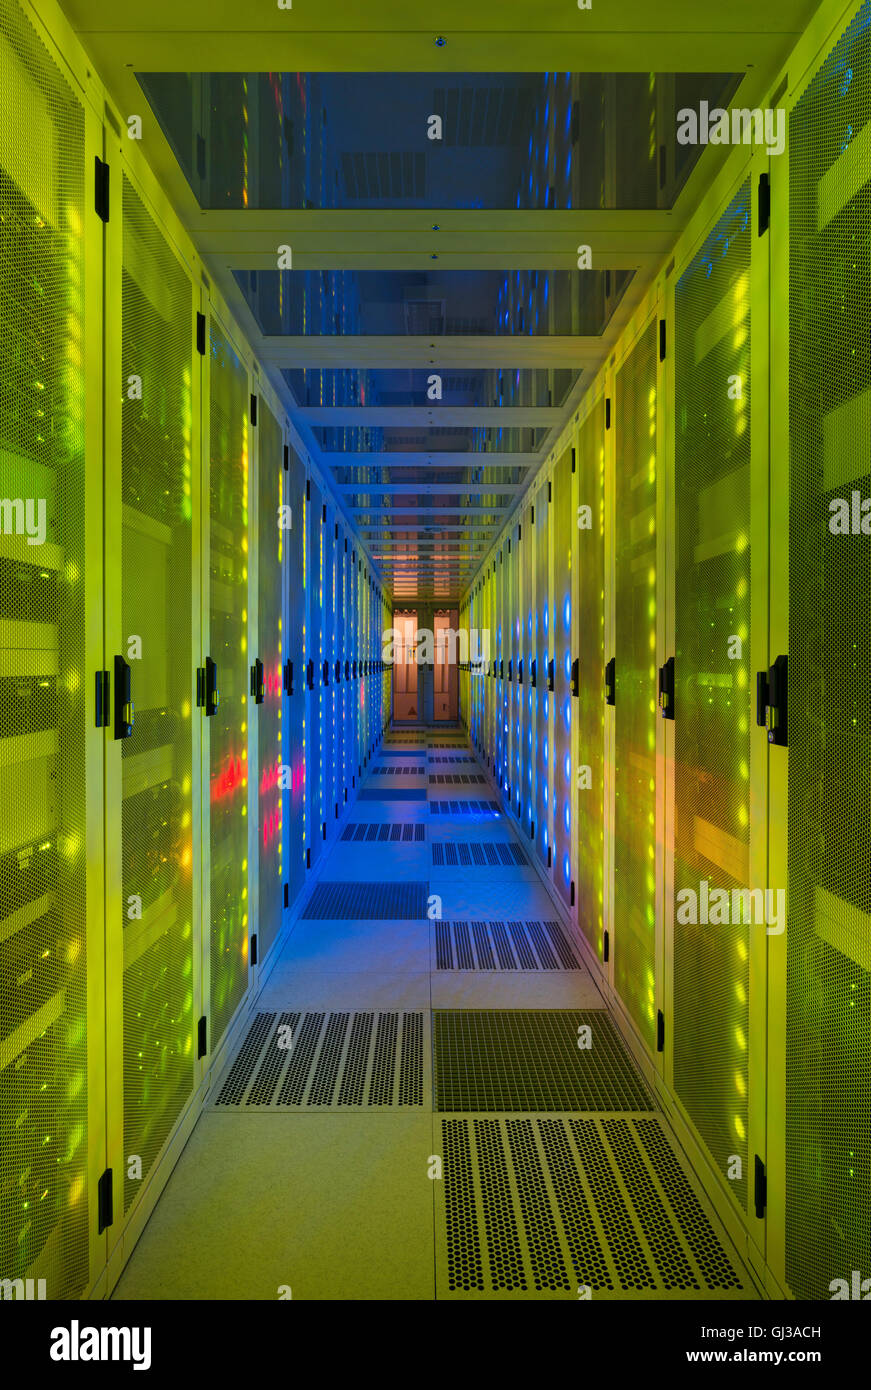 Datacenter for storing large amounts of data, and is an important hub for the internet Stock Photo